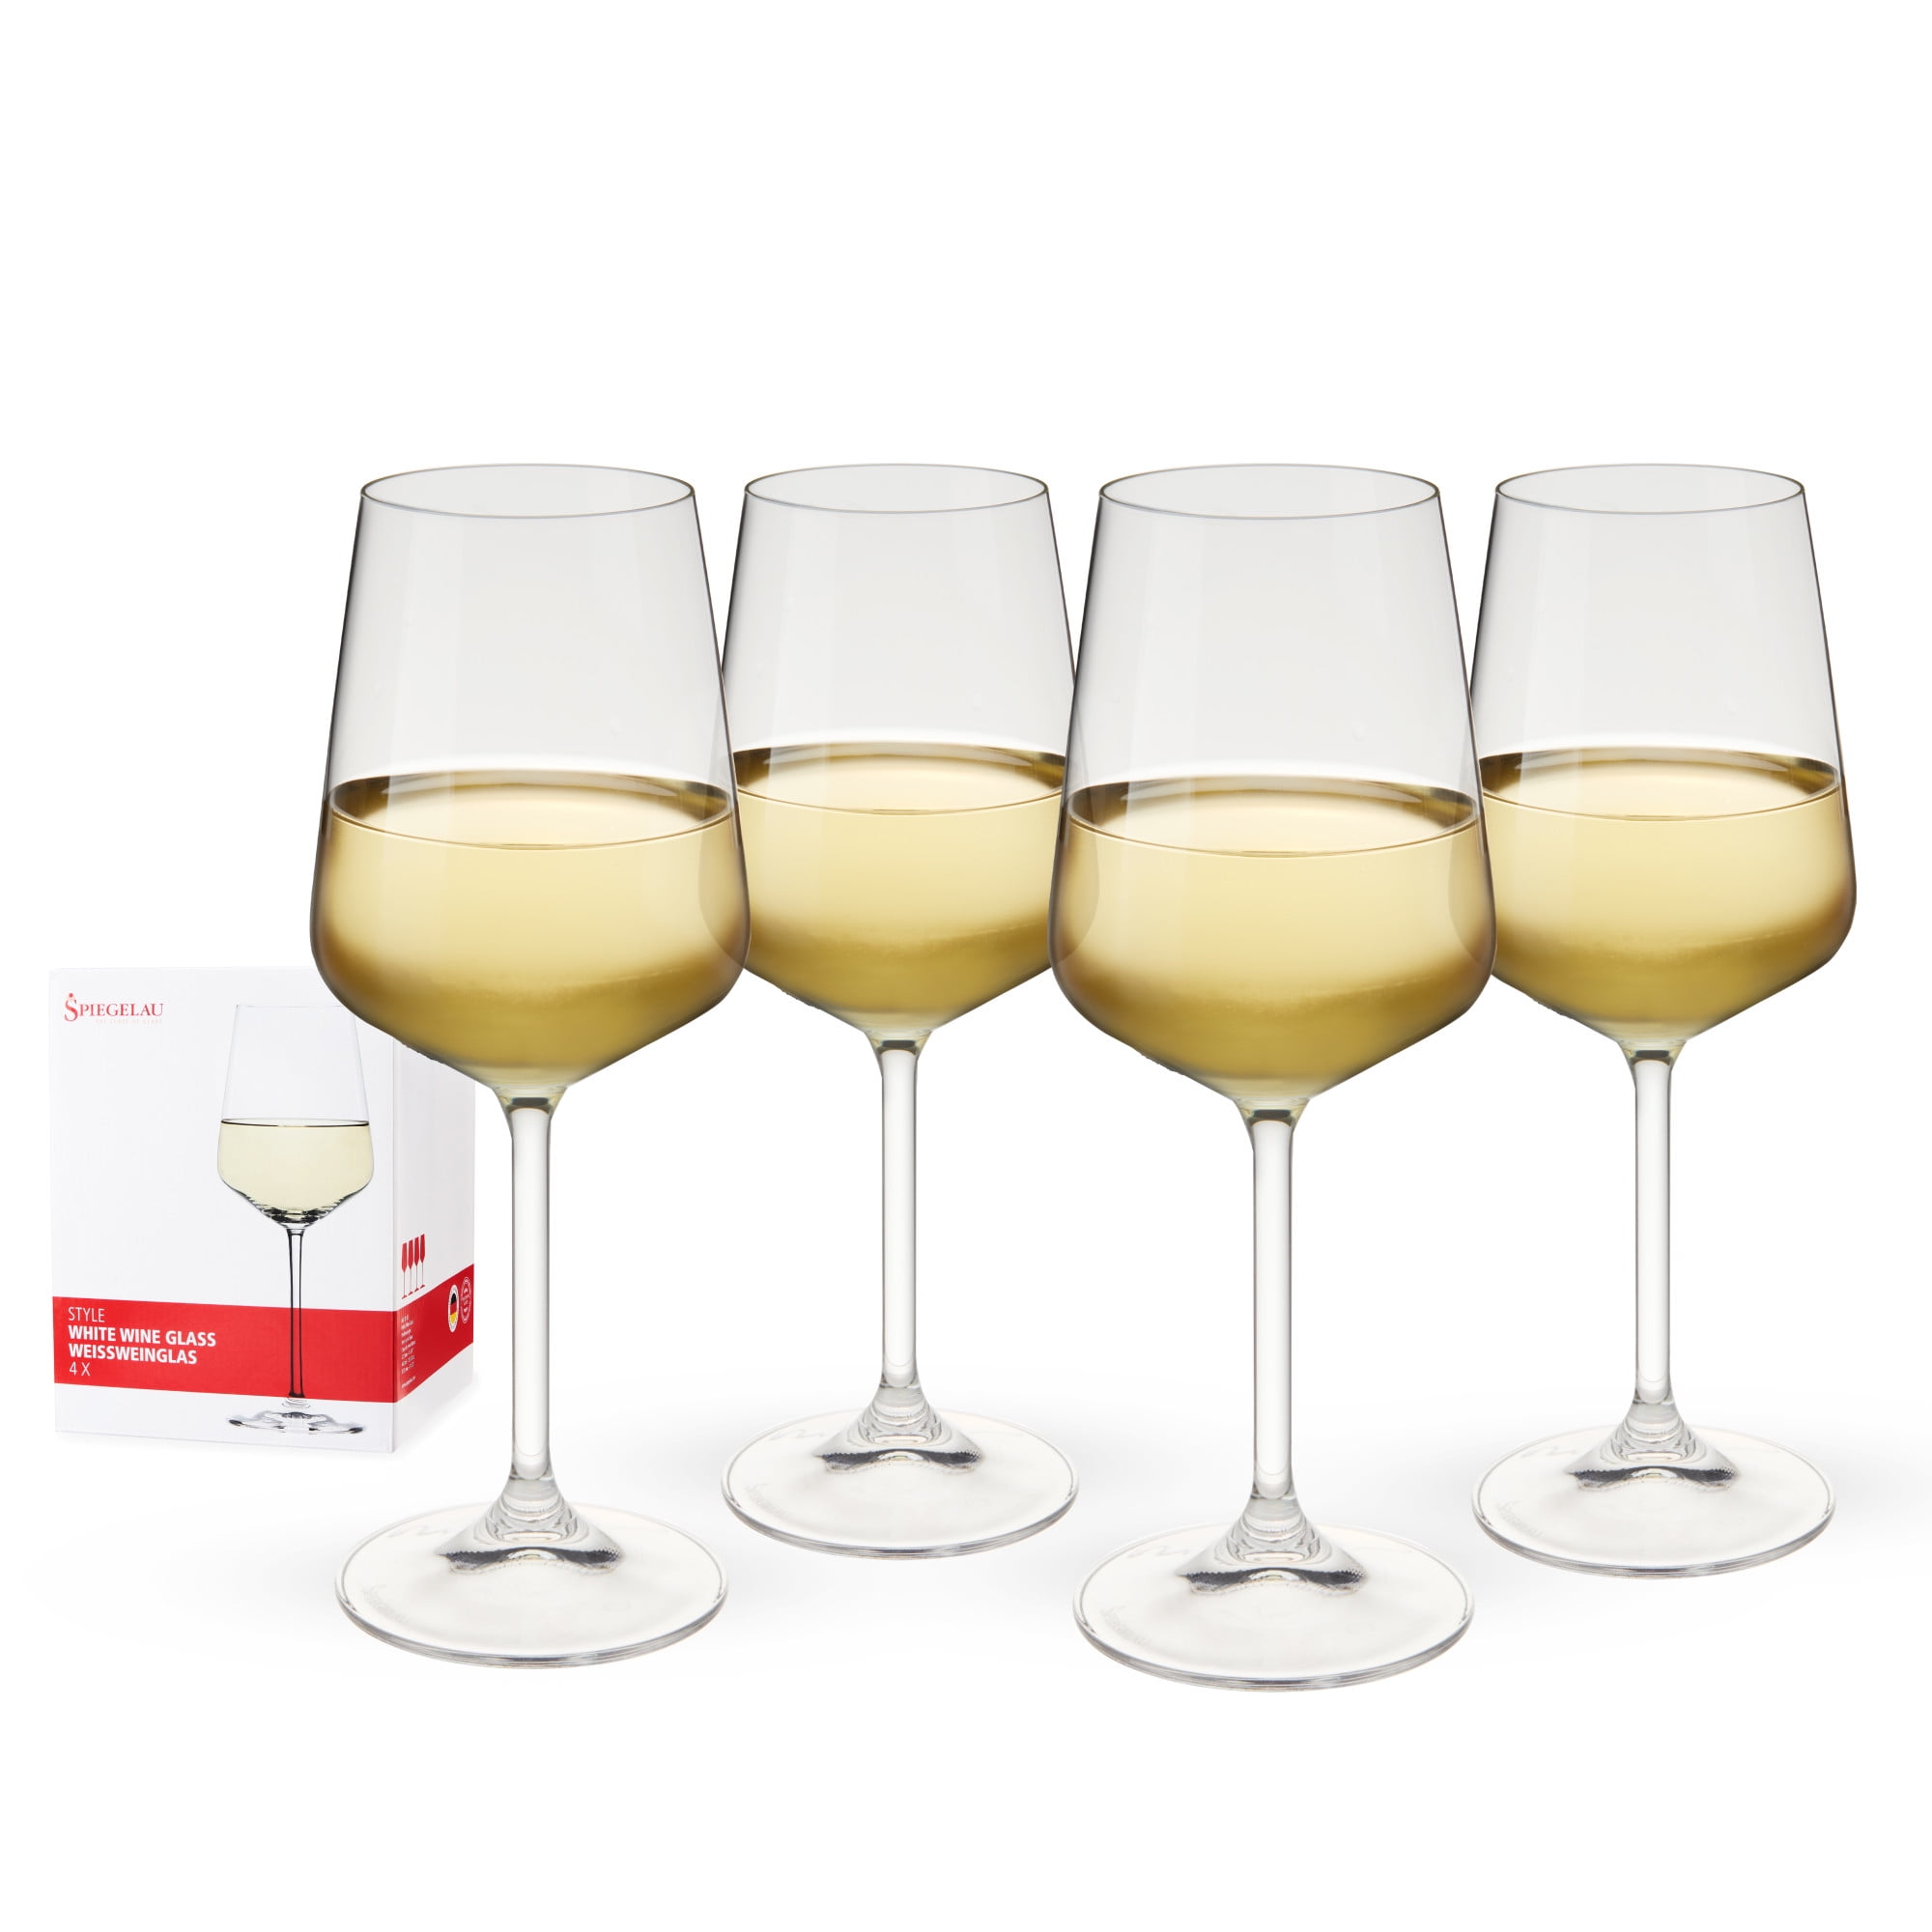 G Francis Large 'Red Wine' Glasses Set of 4 - Slant Rim Wine Glass with Stem, Size: One Size